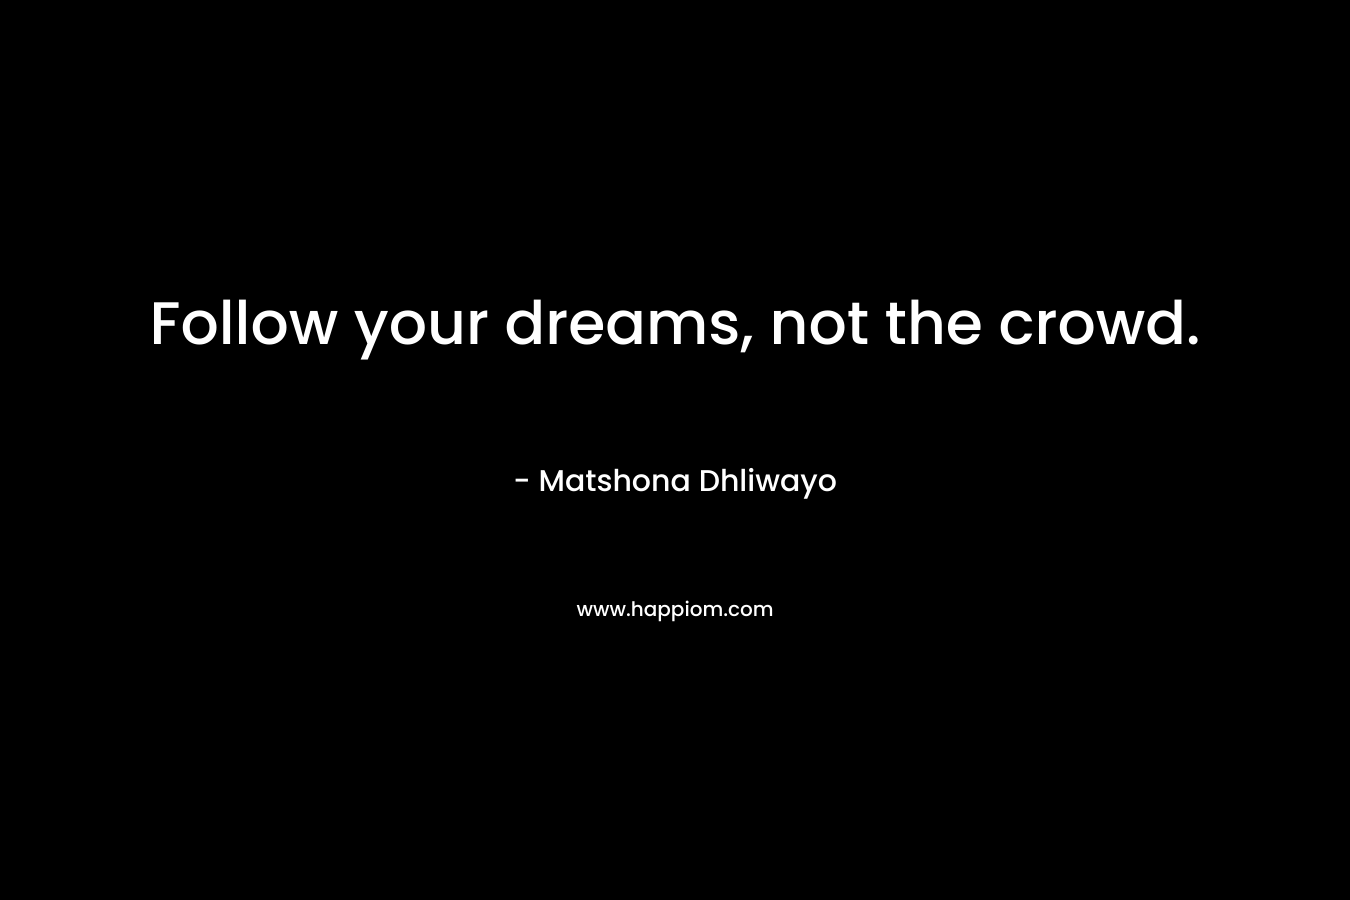 Follow your dreams, not the crowd.